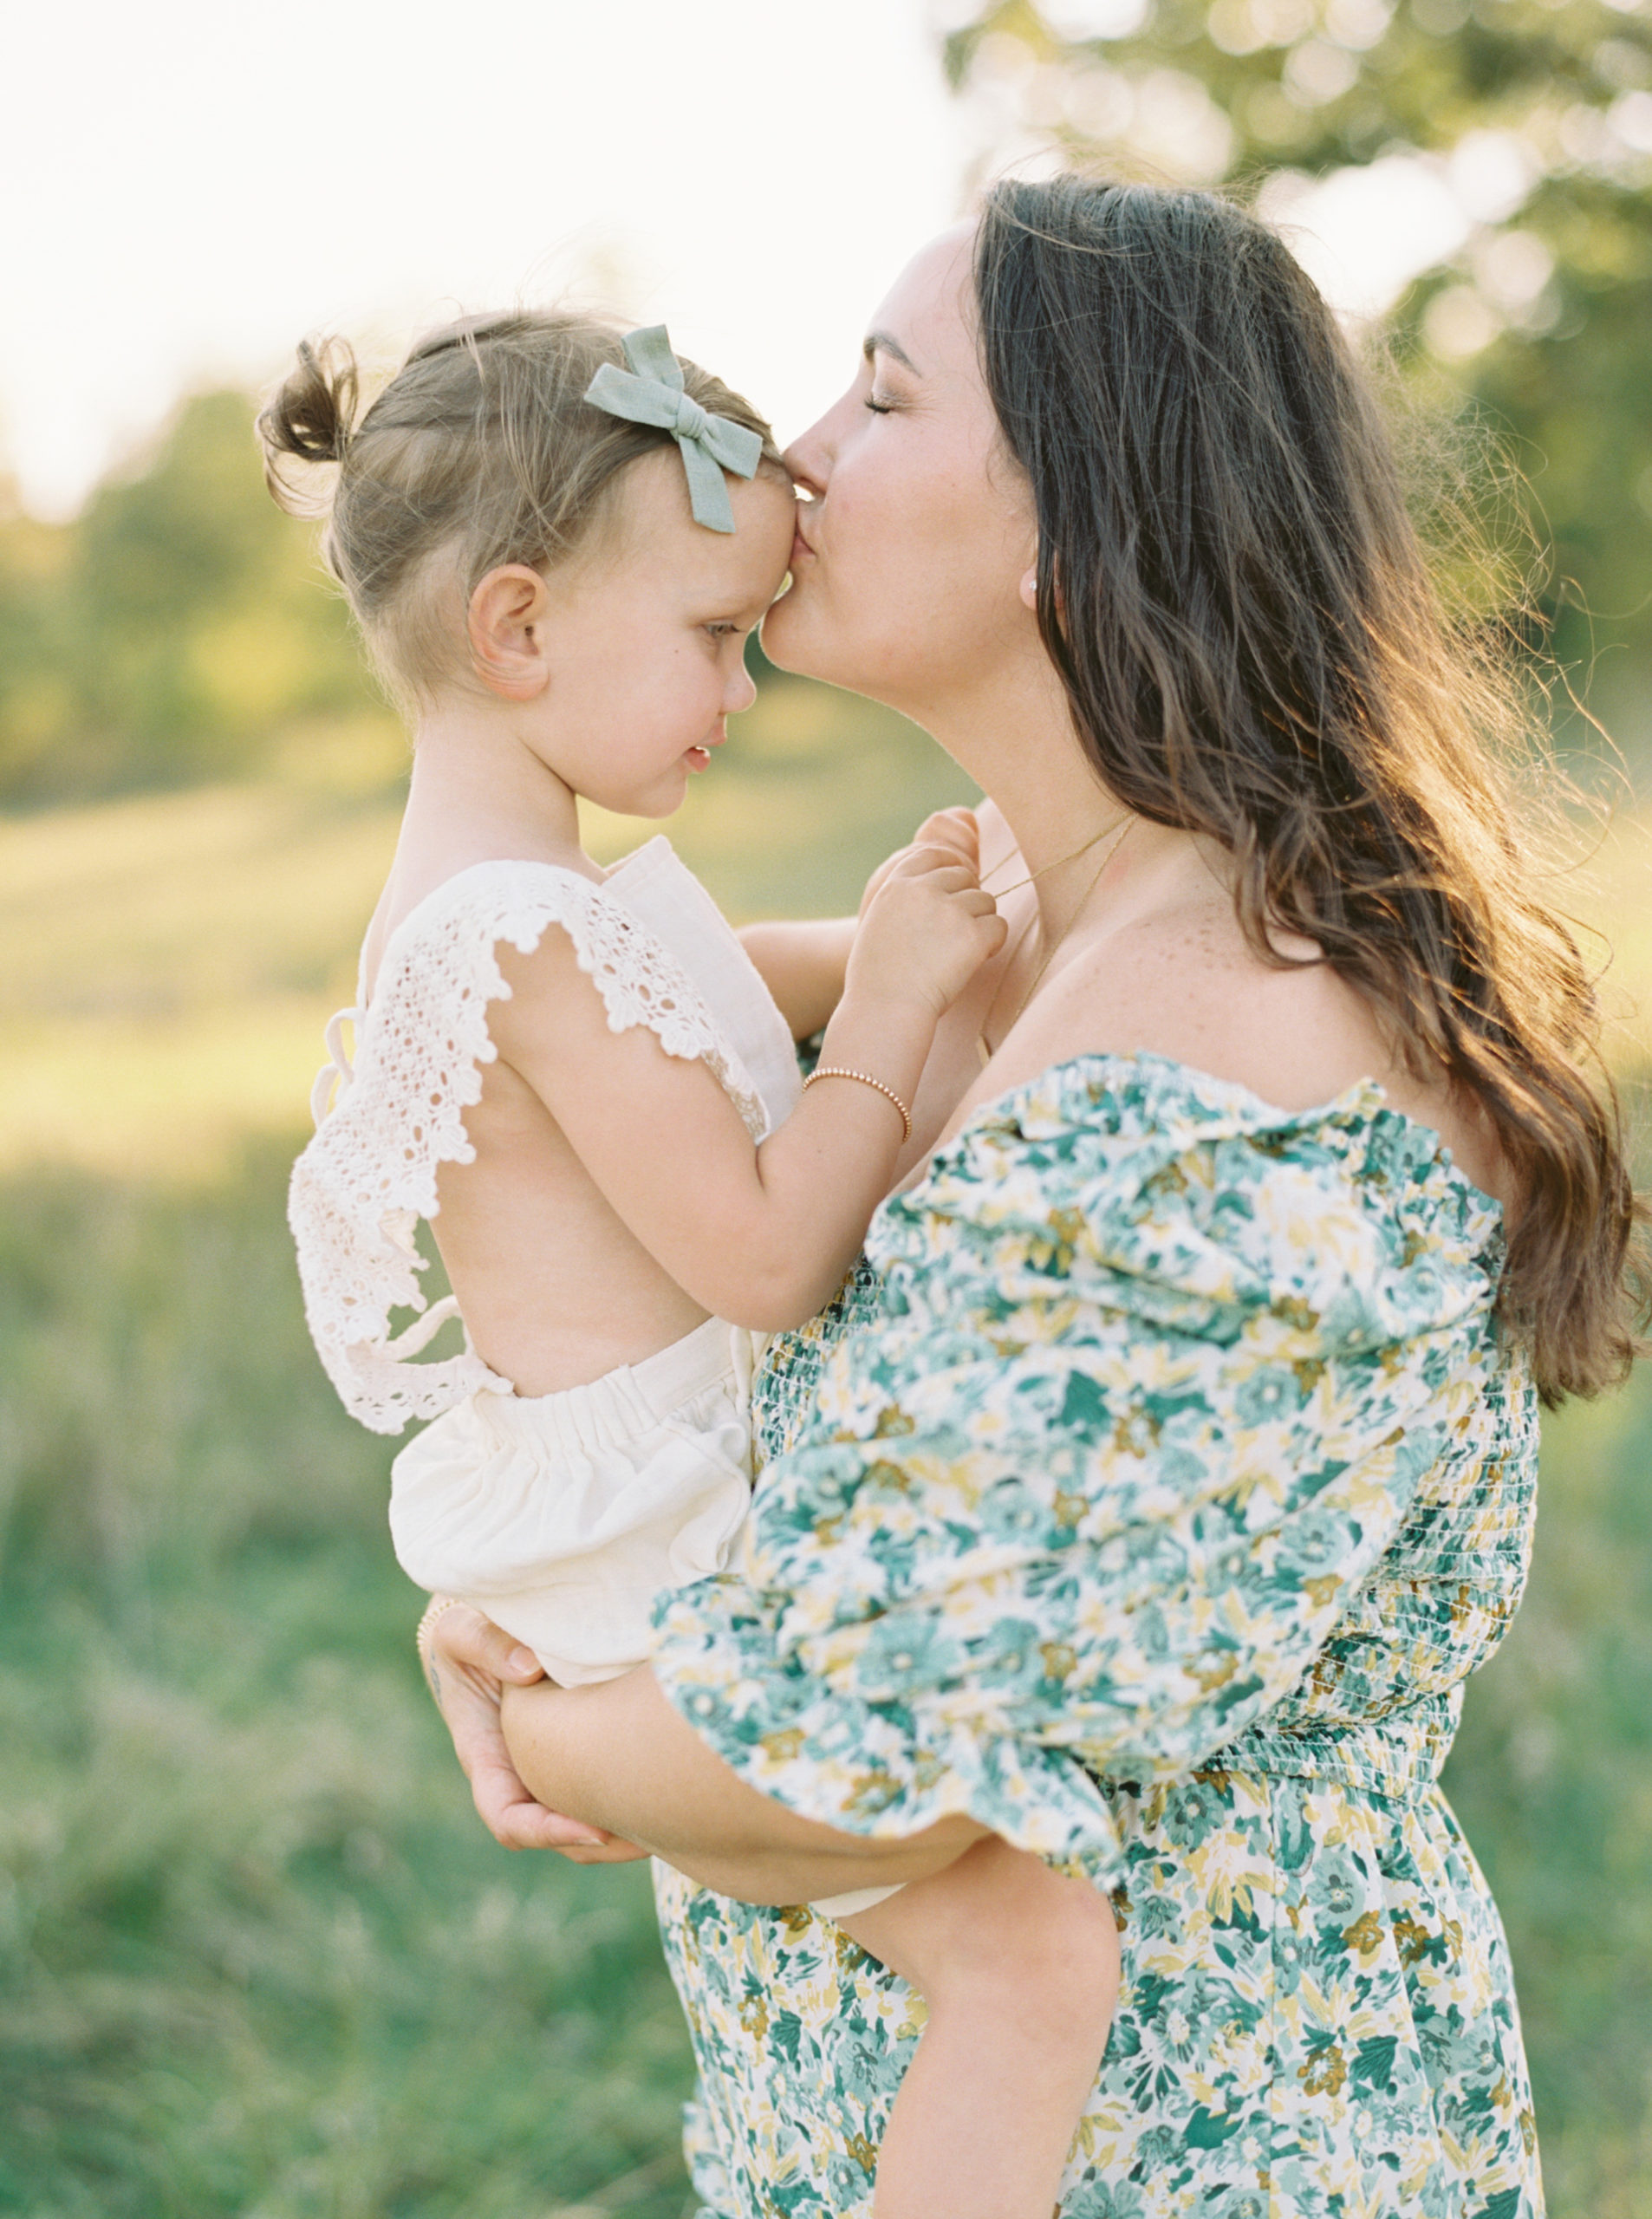 Mother and daughter cuddle in a grassy green field setting in Shorewood in the summer